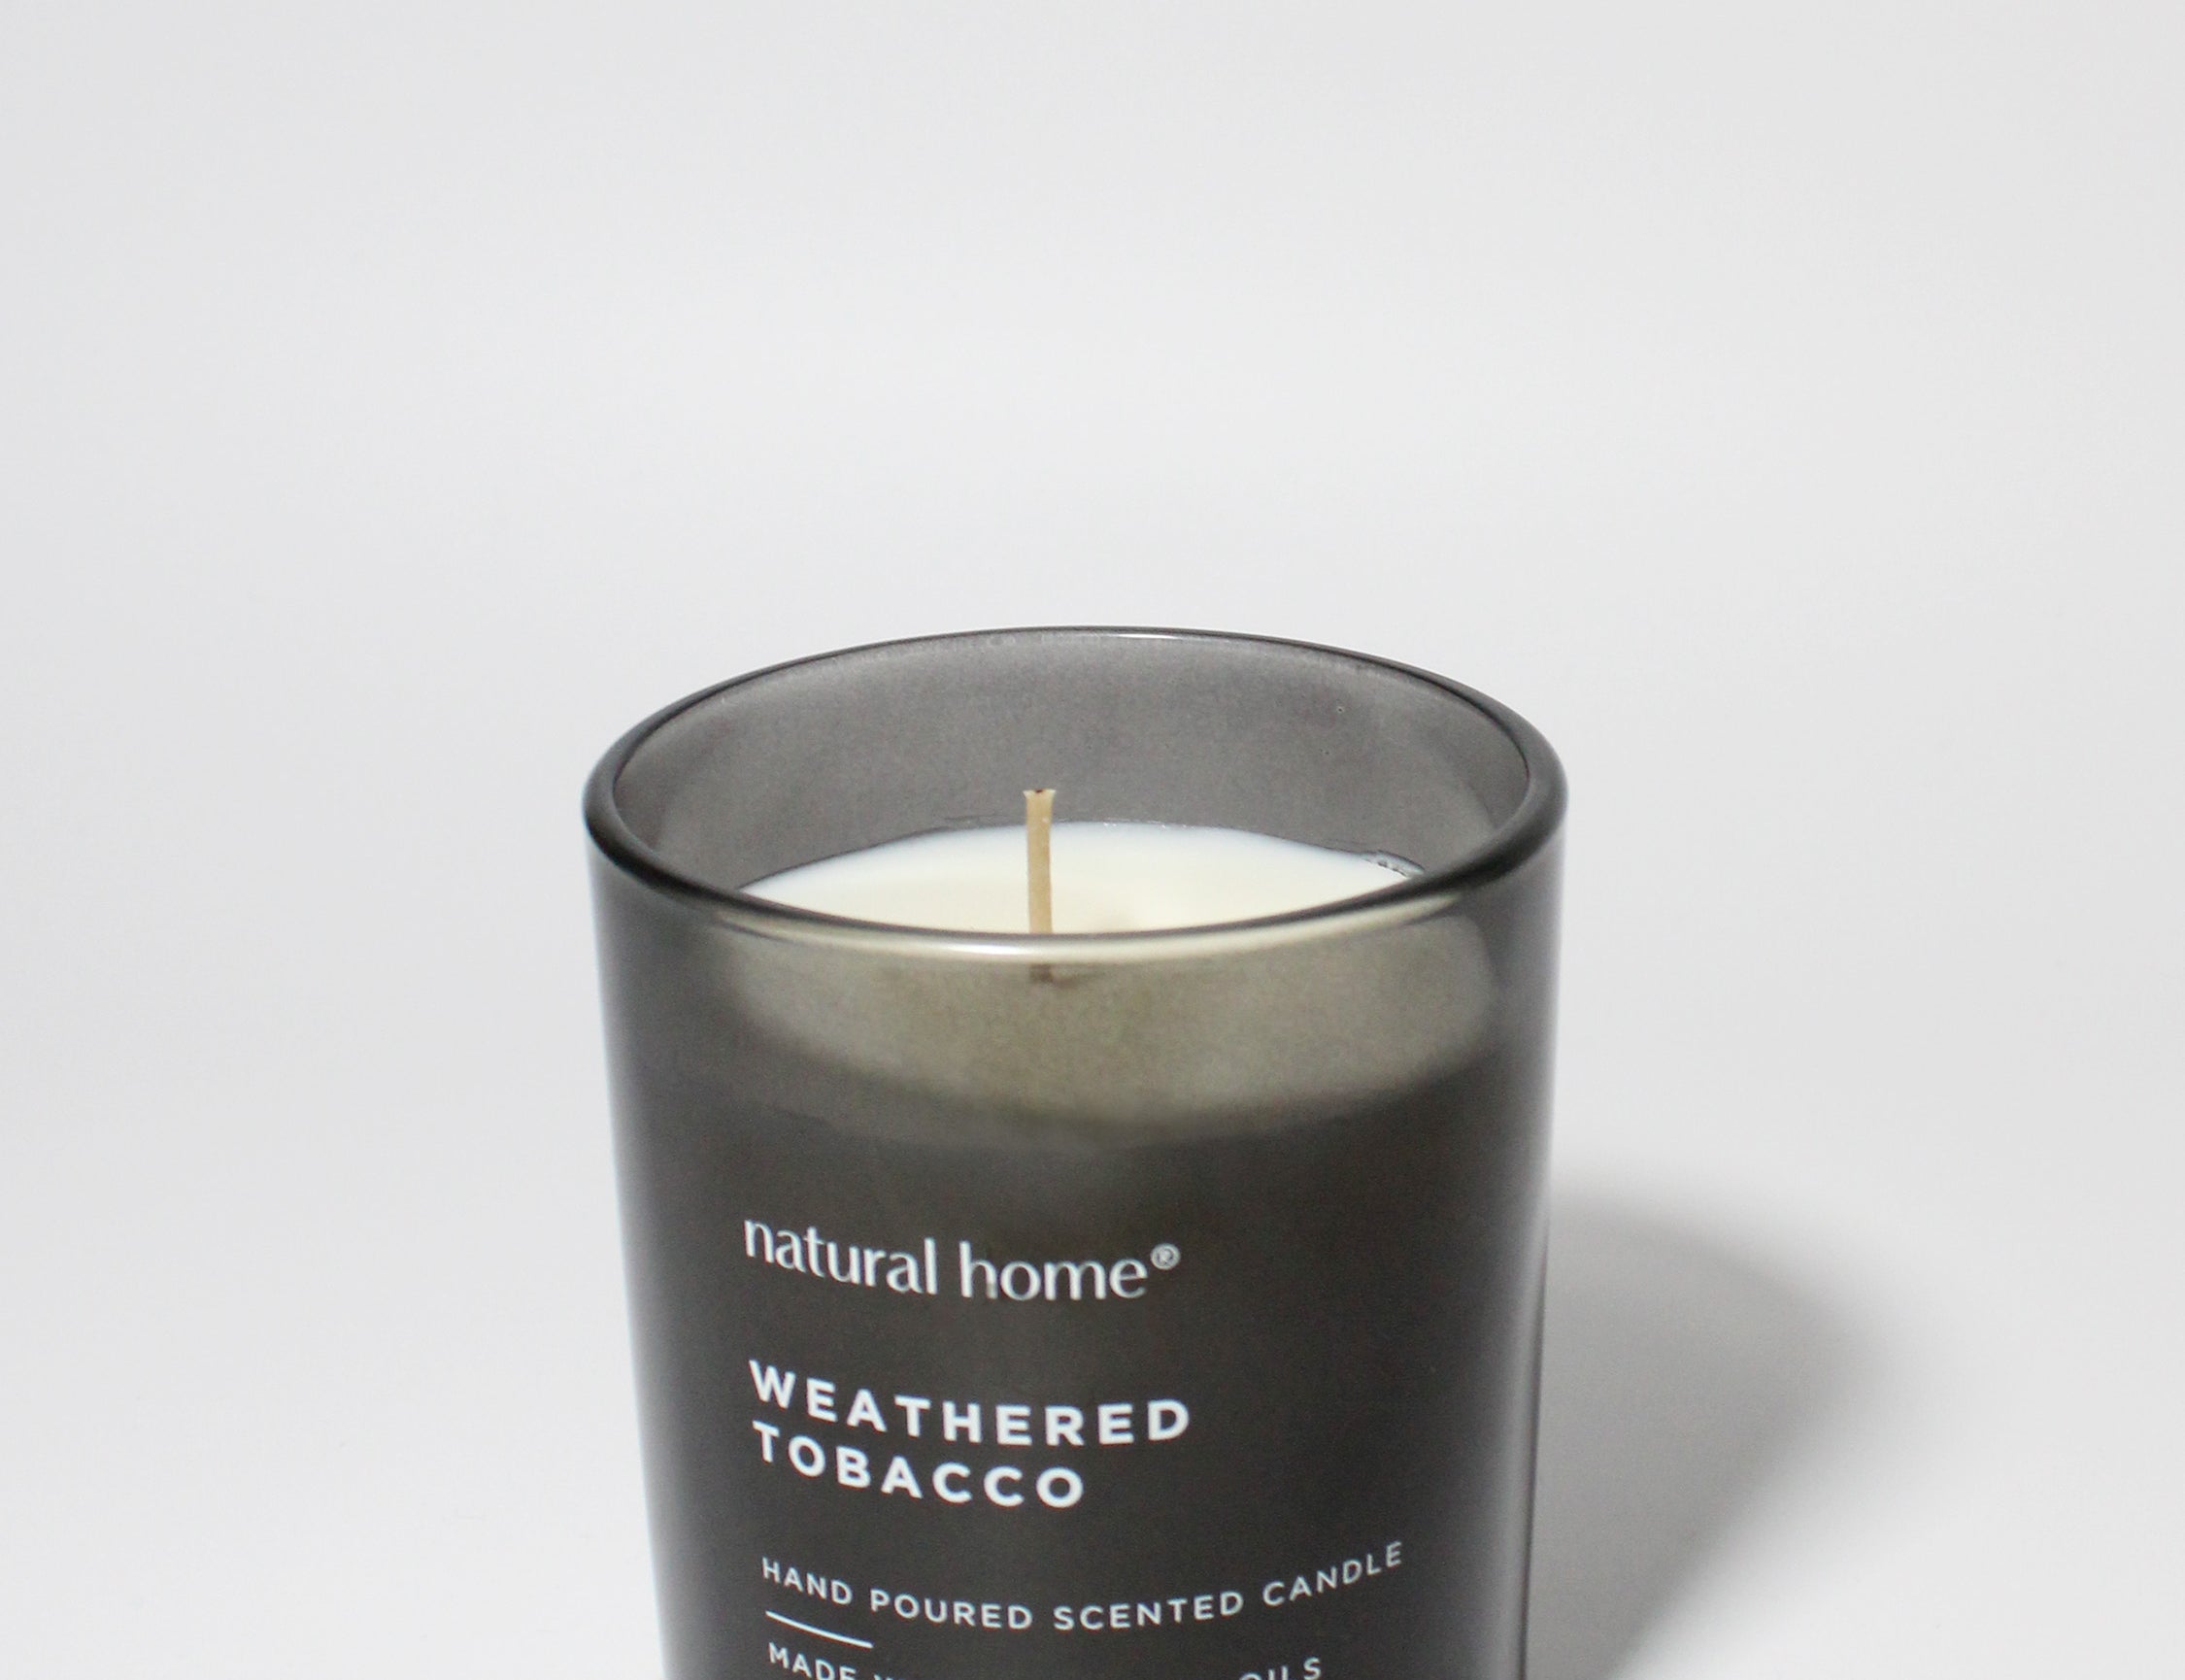 Weathered Tobacco Natural Home 11.5 oz scented candle Black vessel with metal lid